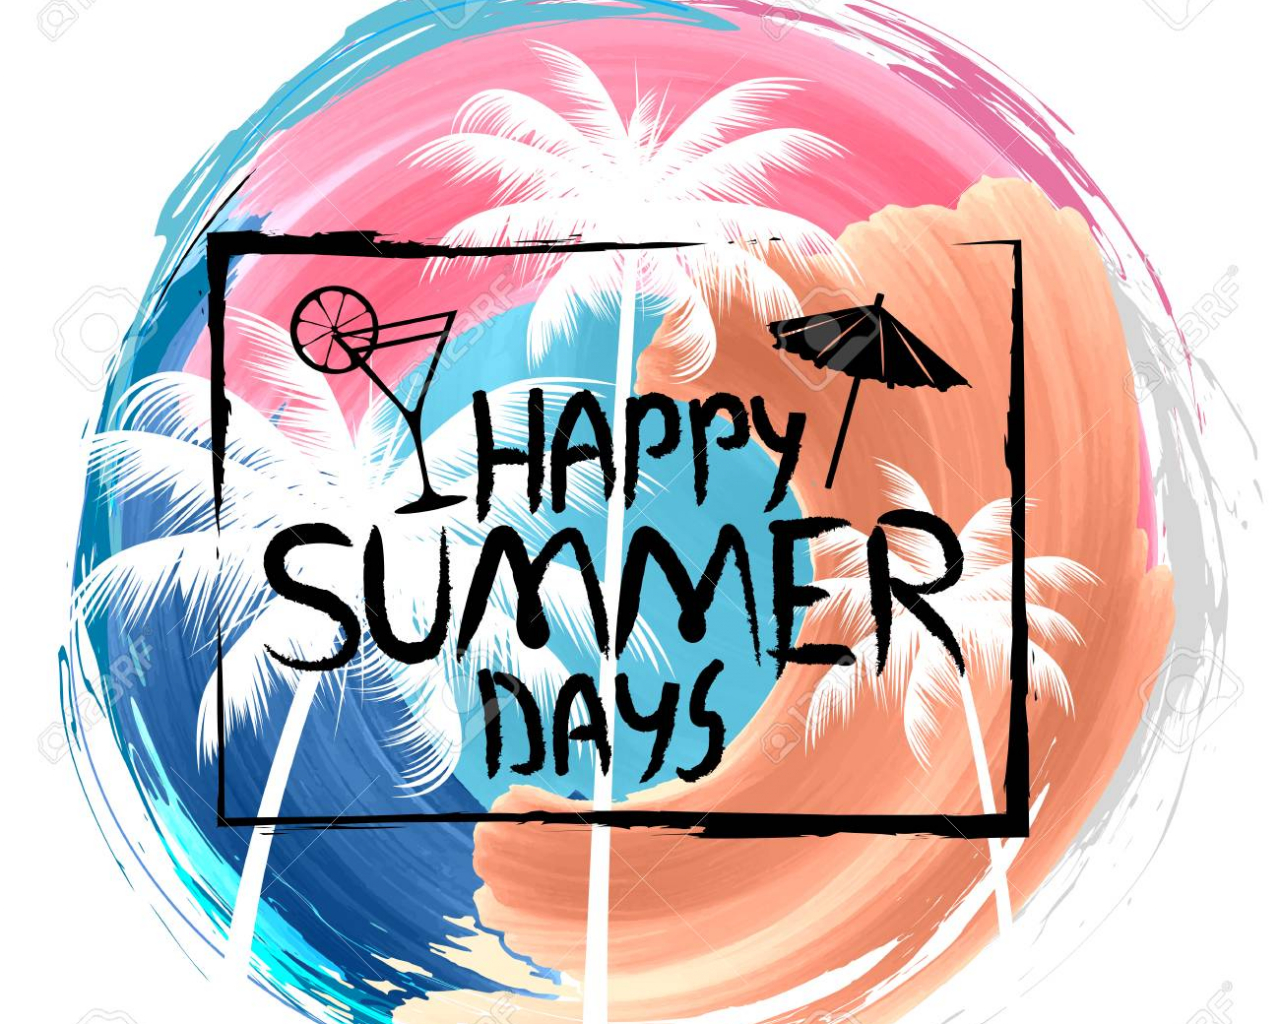 Free download Happy Summer Days Poster Wallpaper For Fun Party 1280x1024